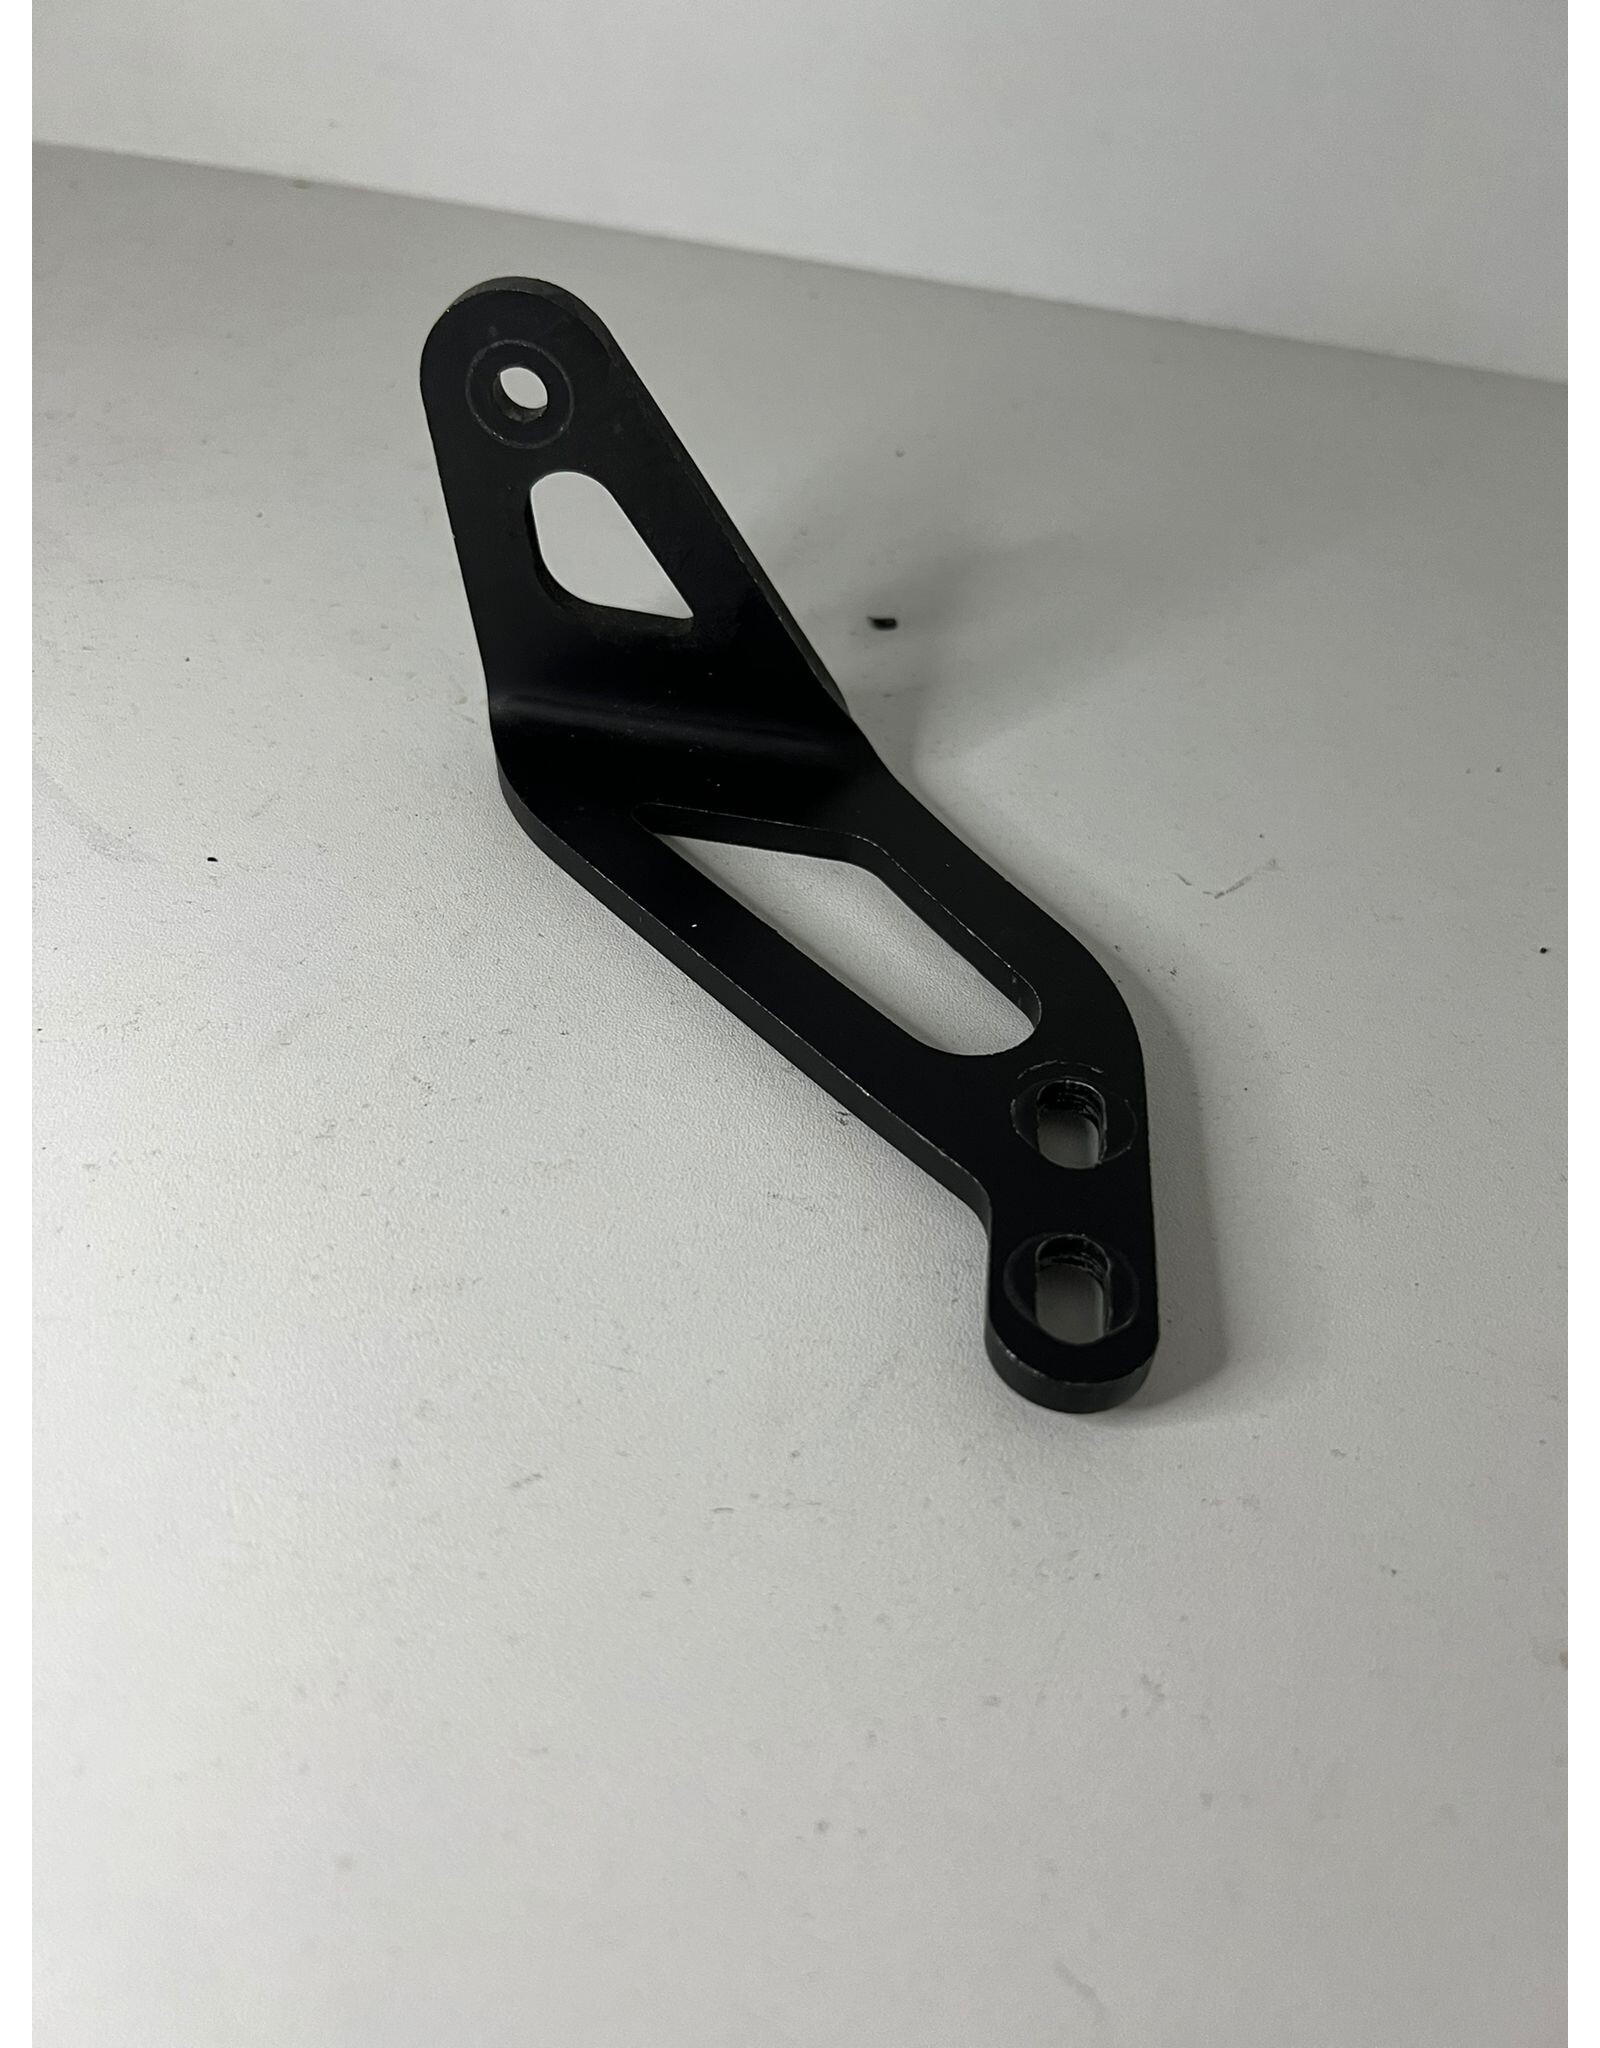 Used Top kart exhaust support